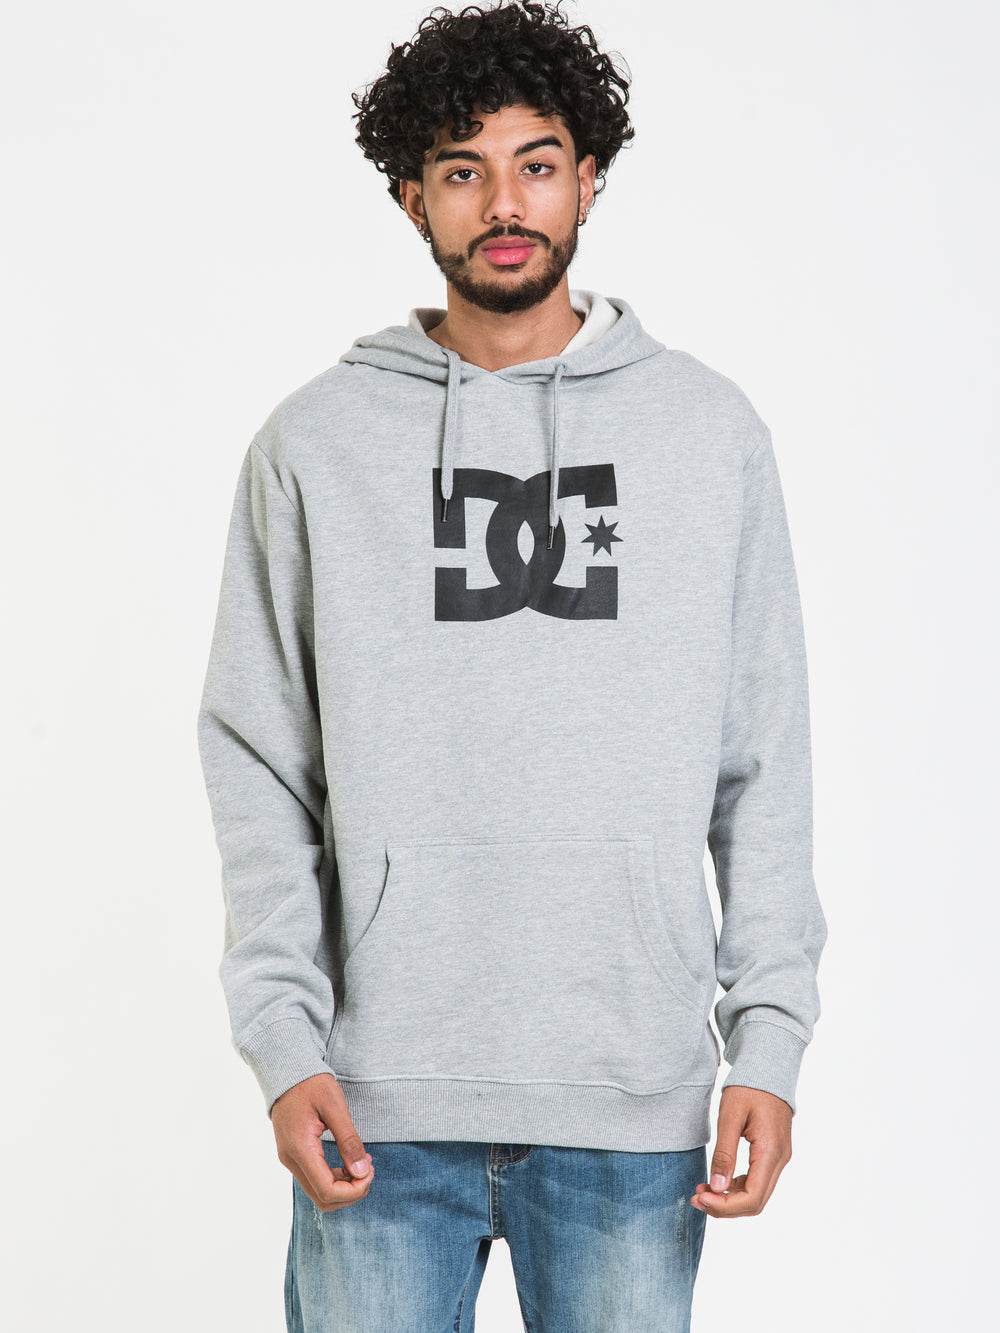 DC SHOES DC STAR HOODIE - CLEARANCE